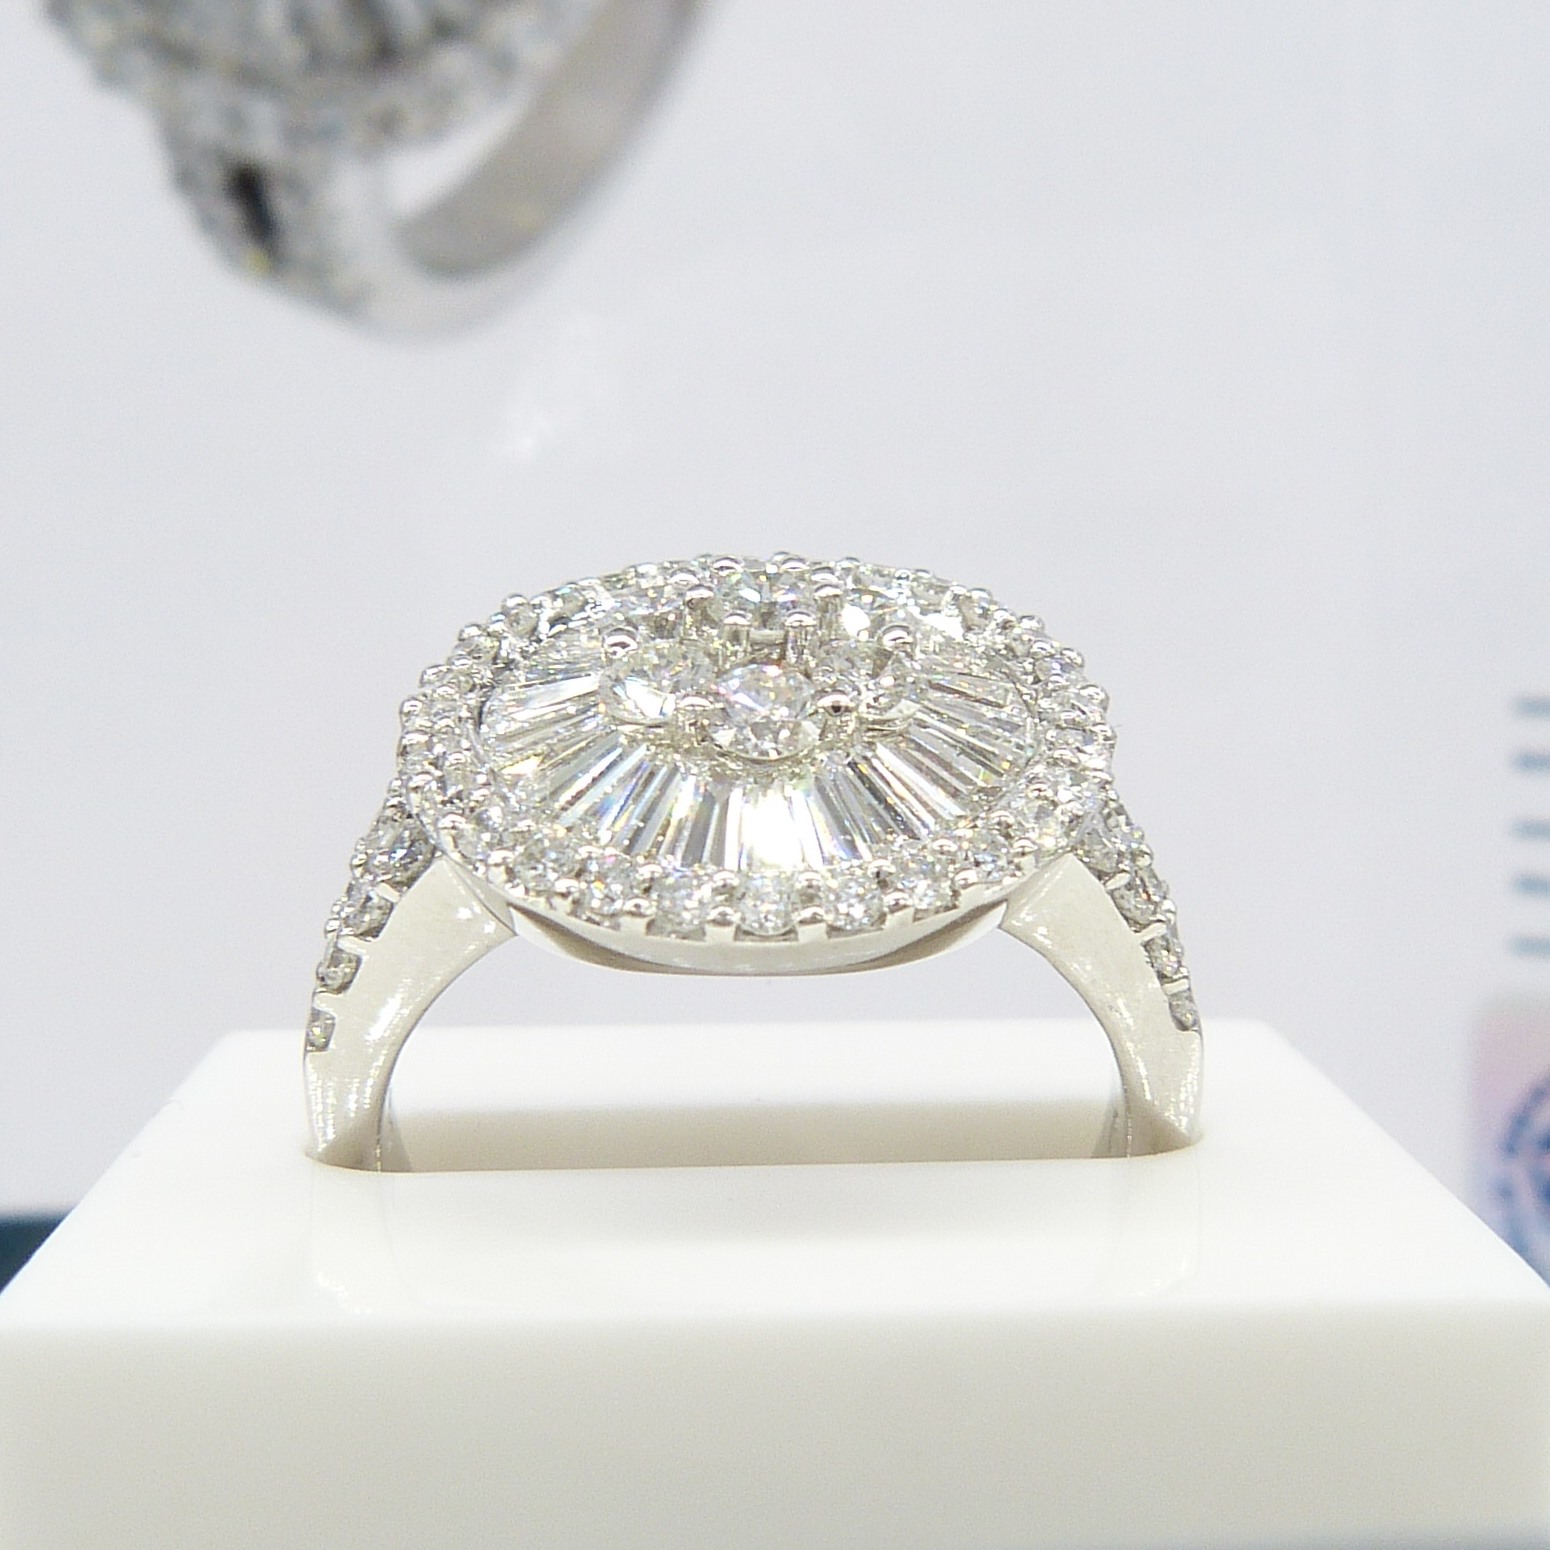 An attractive, certificated, 2.05 carat Diamond cluster ring in 18k white Gold, with Diamond - Image 6 of 10